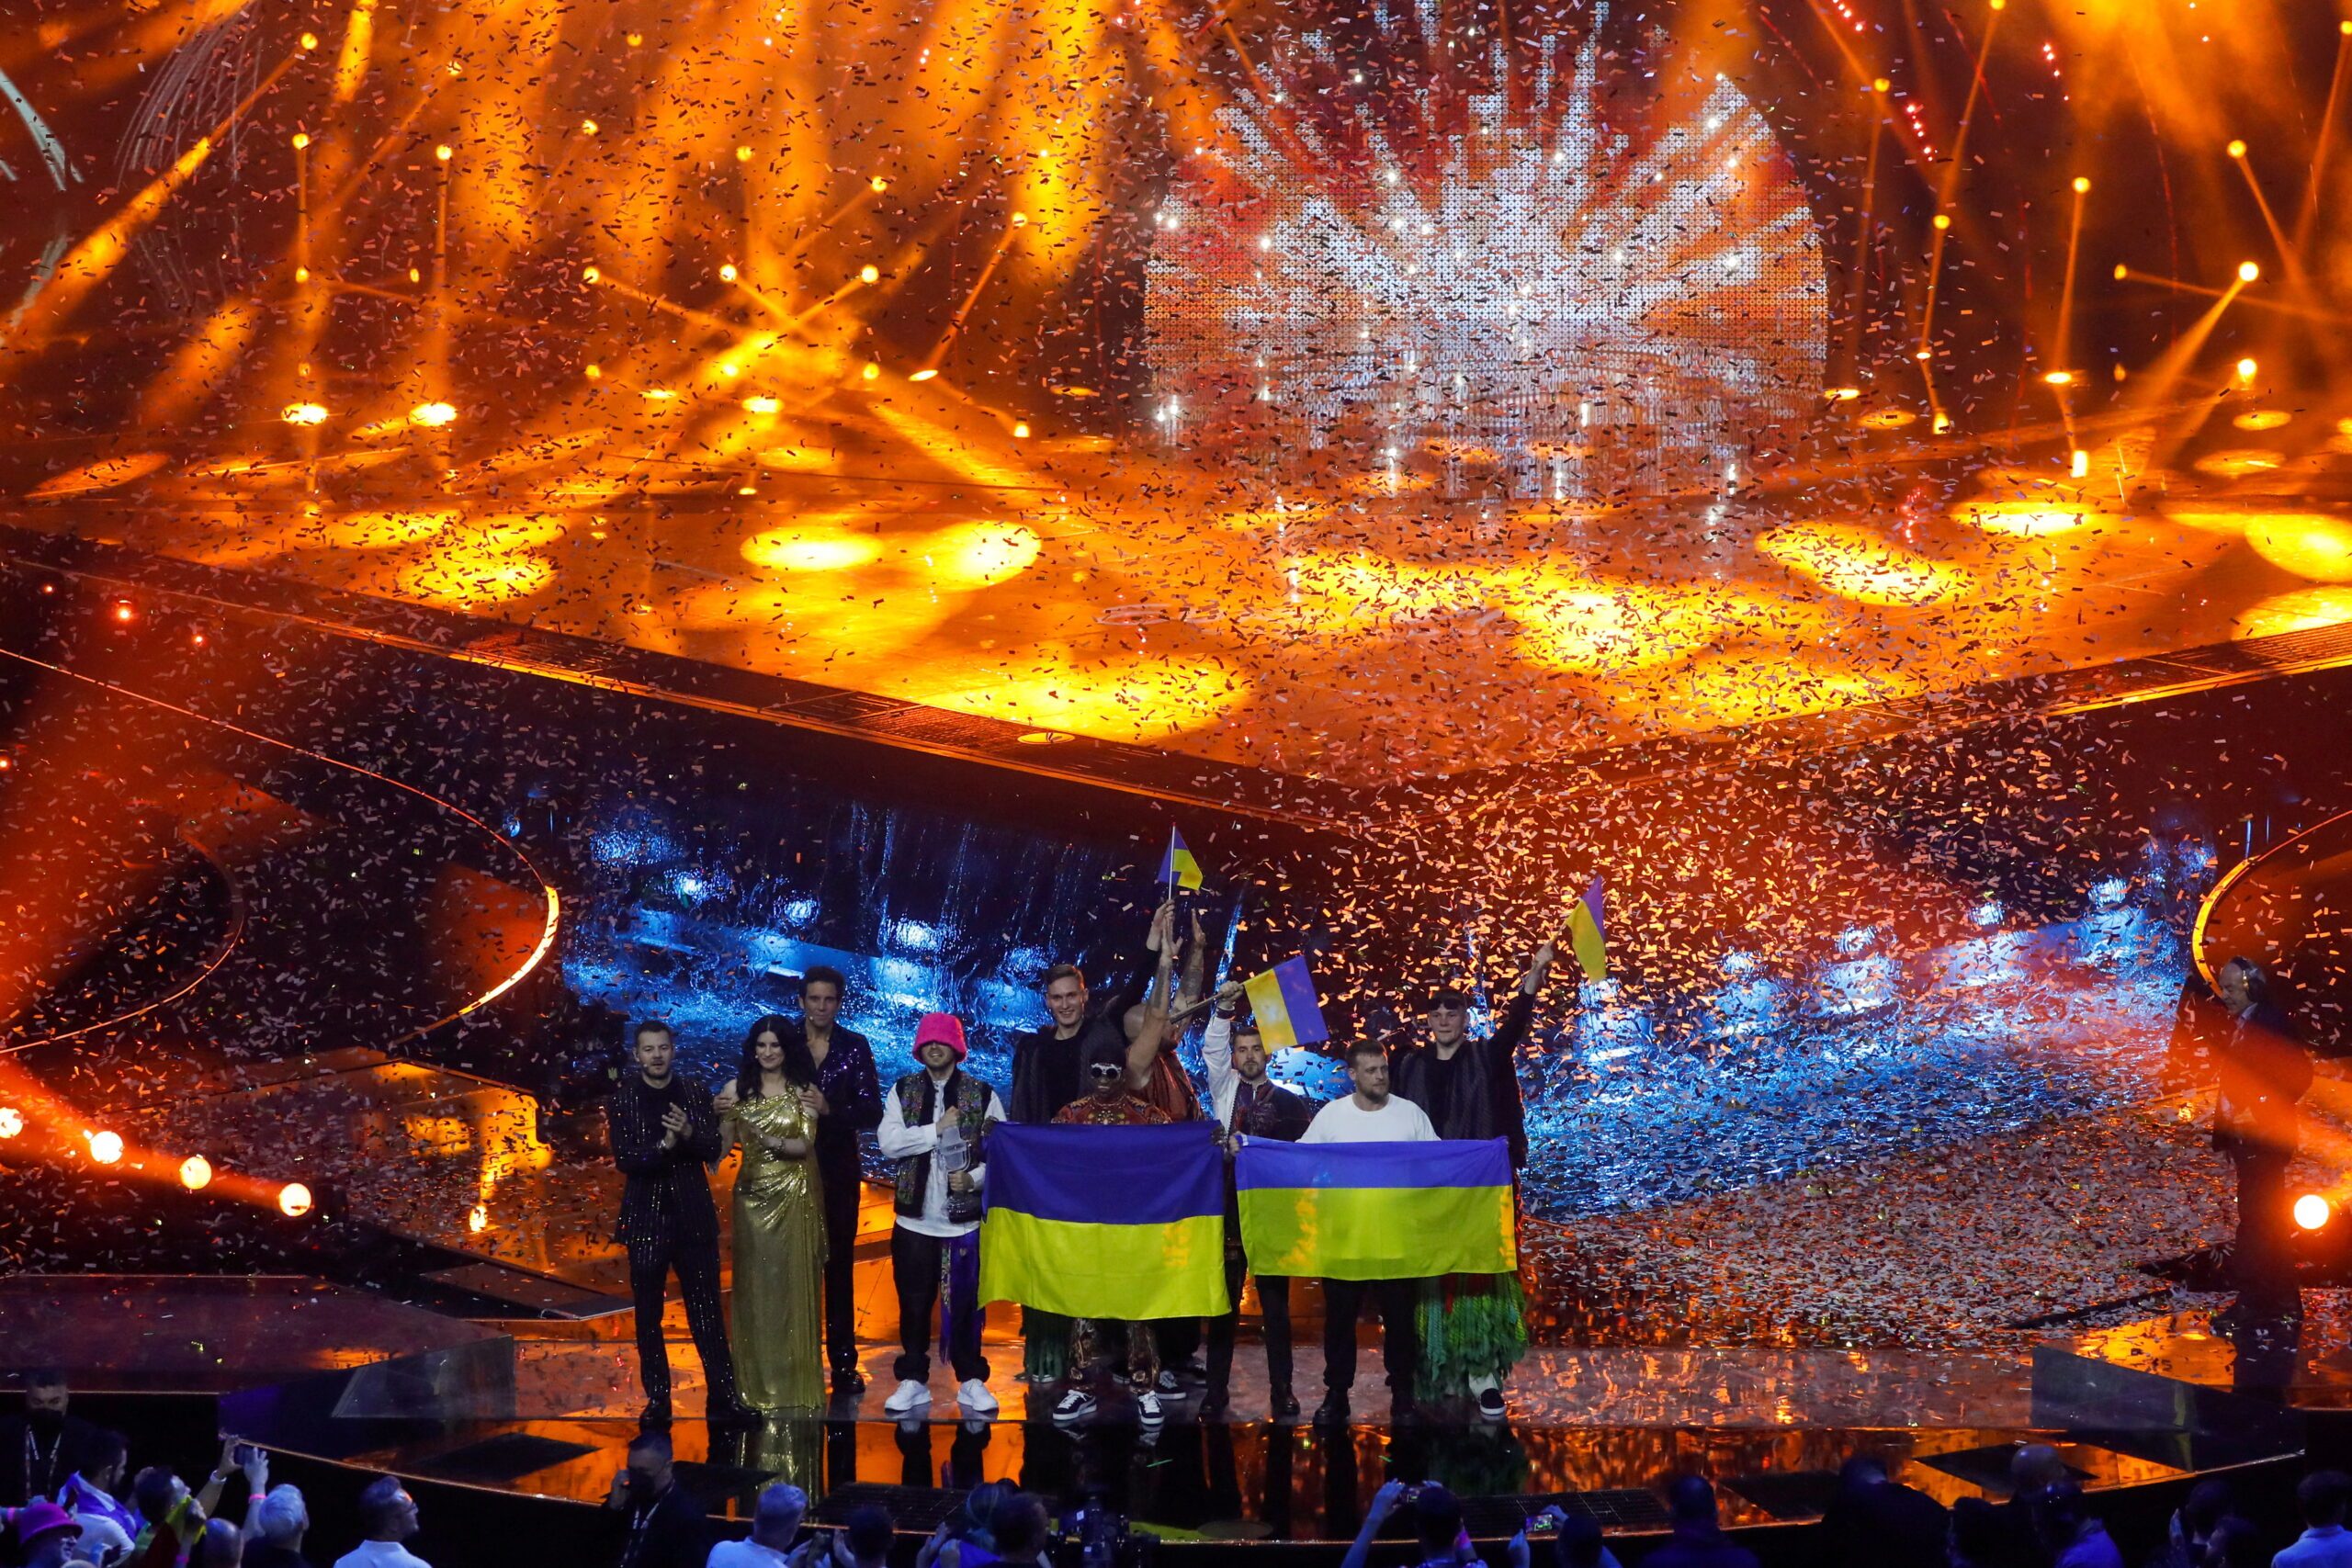 Ukraine can and should host next Eurovision Song Contest, UK’s Johnson says